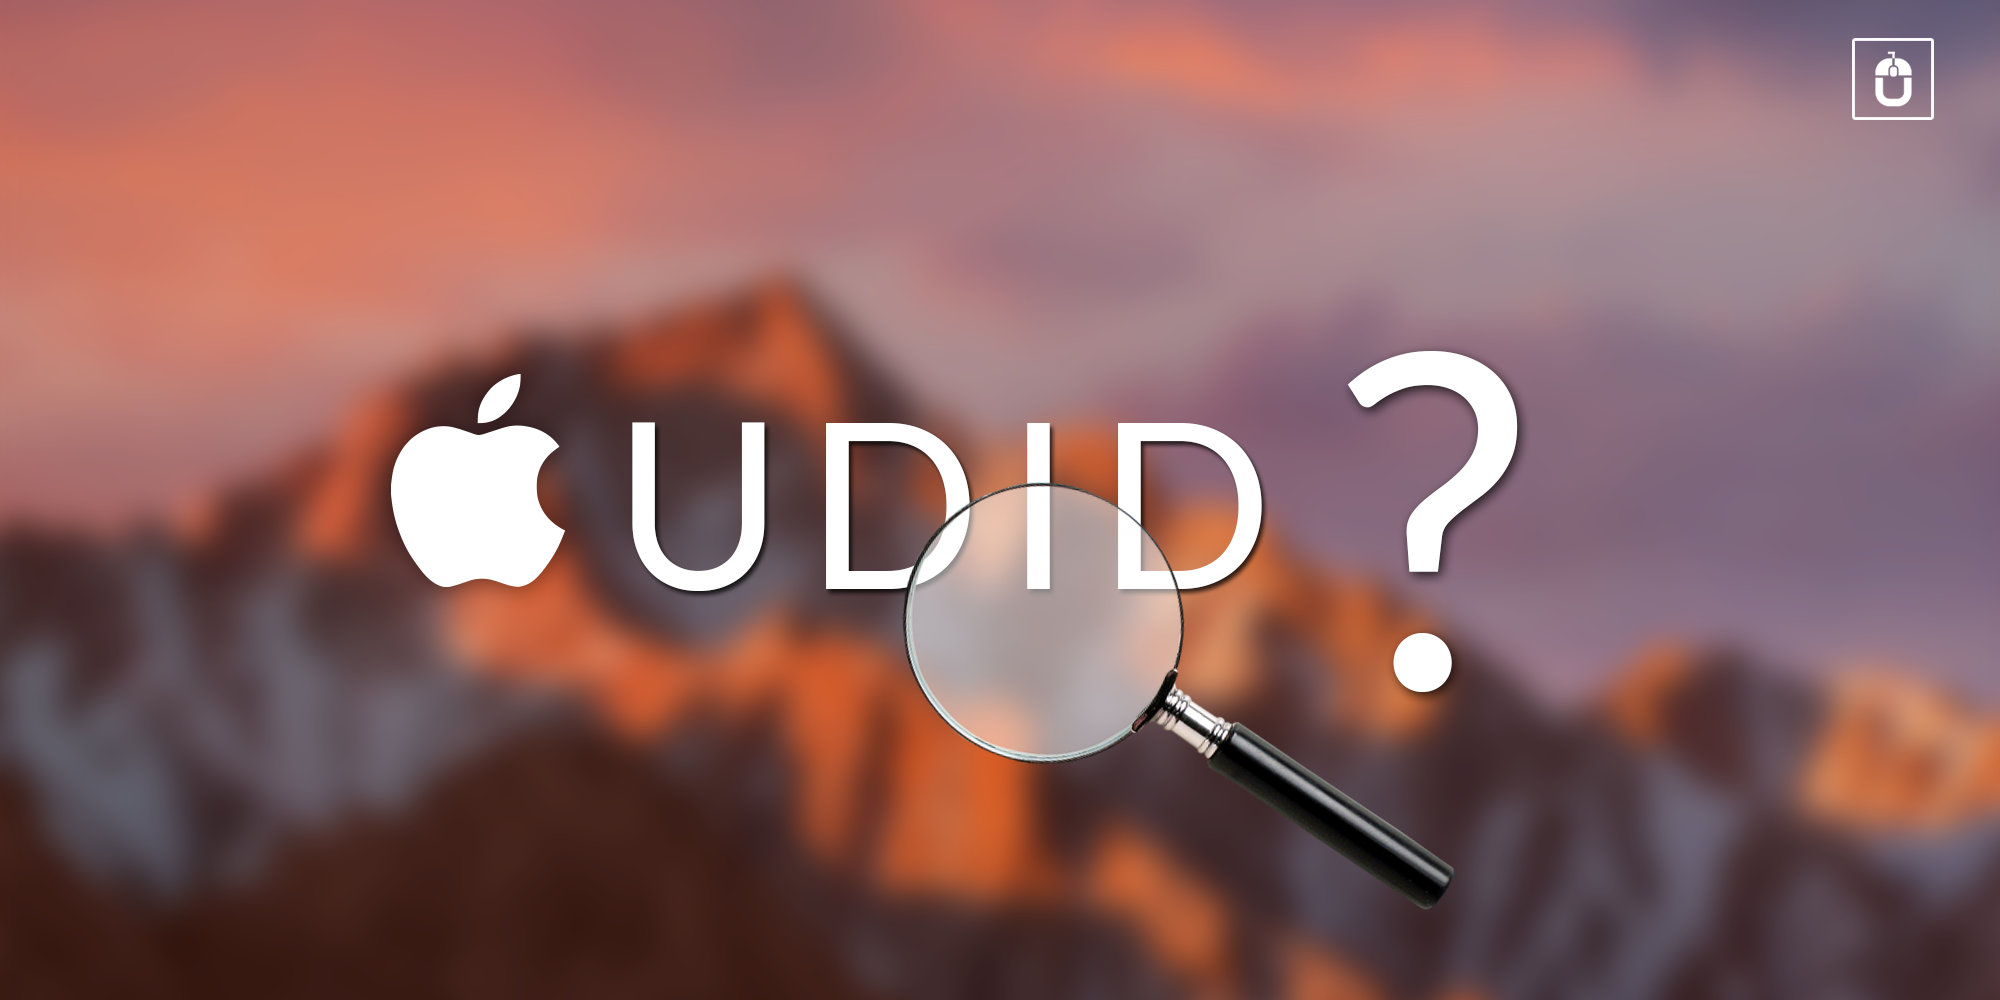 HOW TO GET UDID OF YOUR IPHONE